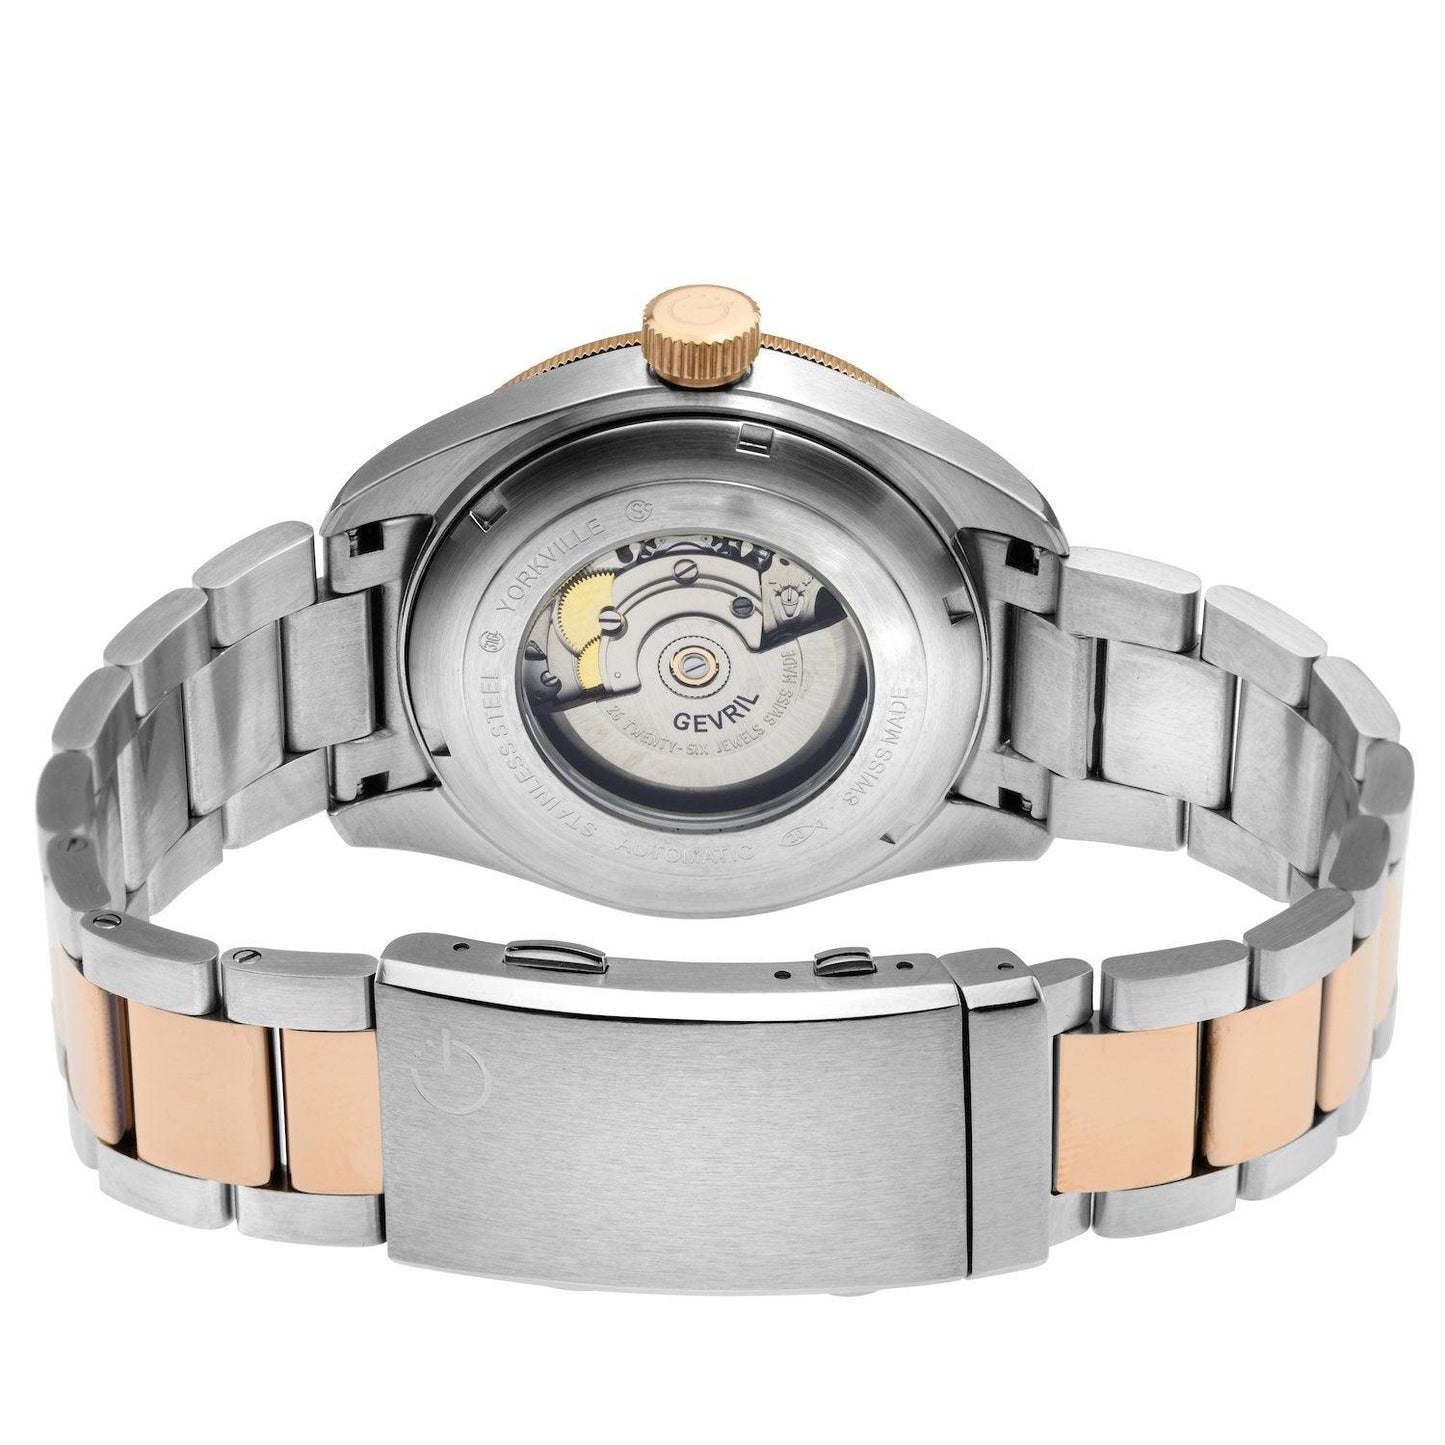 Gevril-Luxury-Swiss-Watches-Gevril Yorkville Automatic-48603